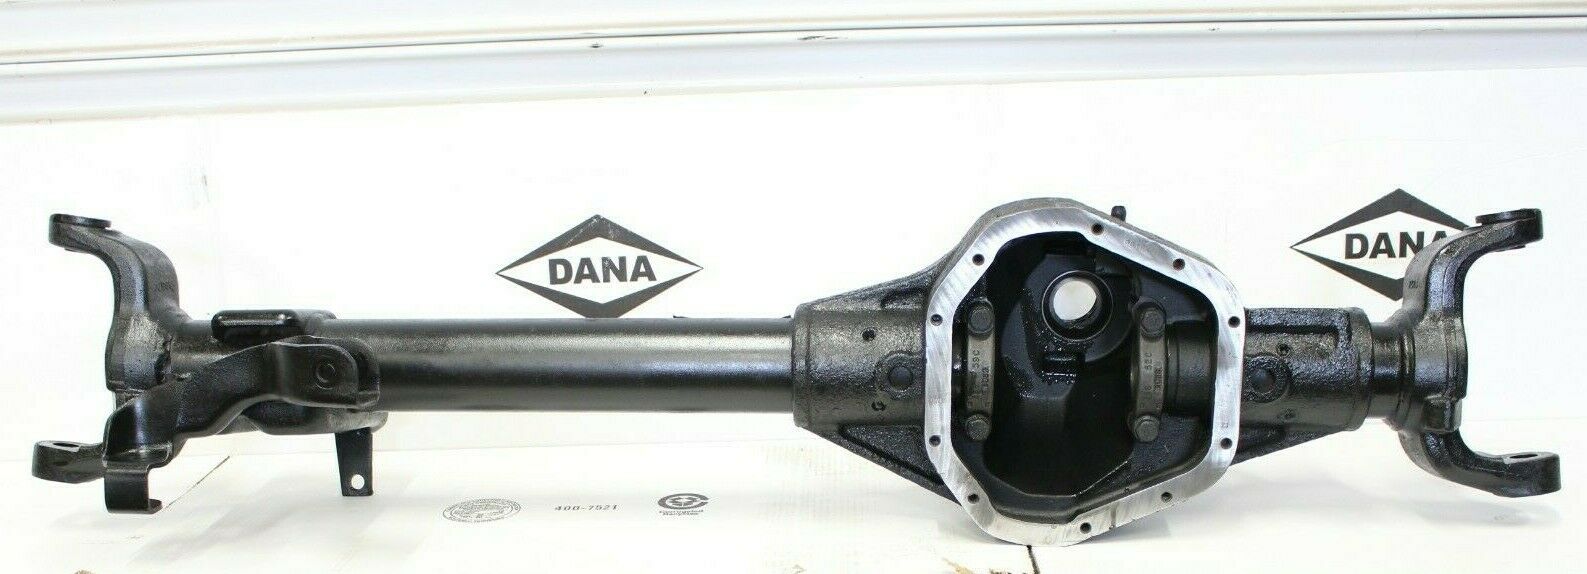 Chevy Truck X With Dana Front Axle